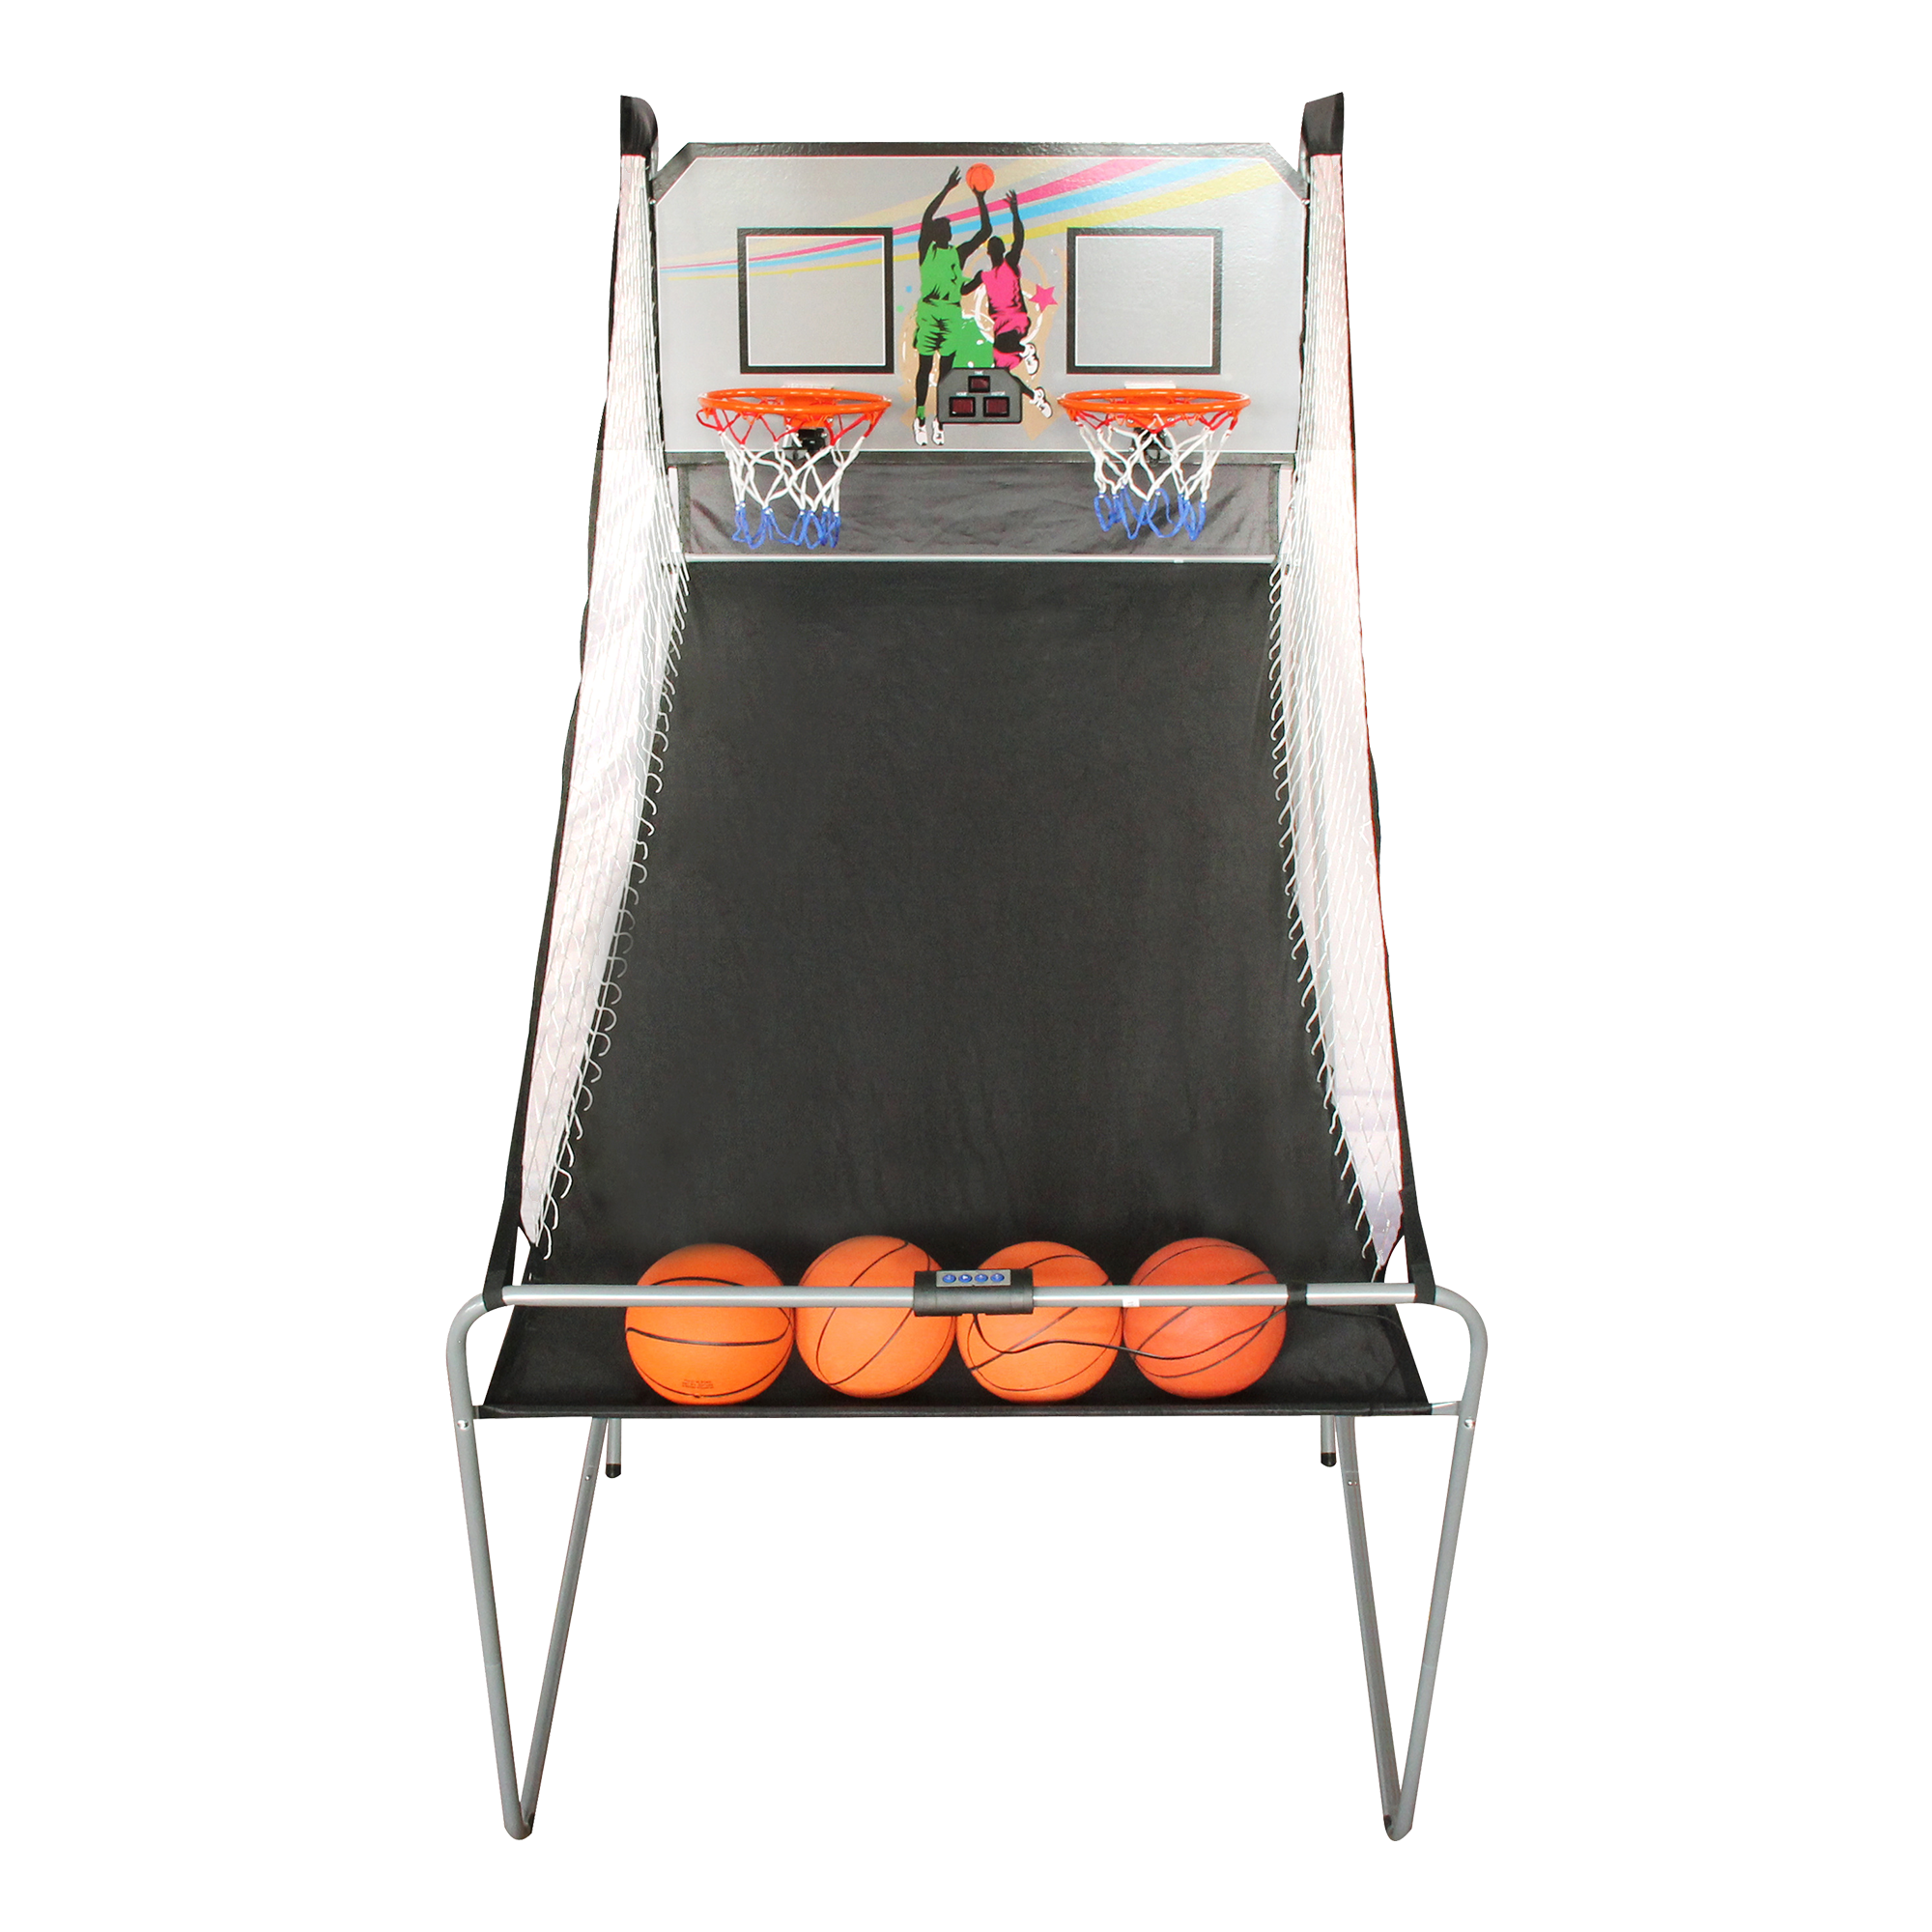 Arcade Basketball Game 2-Player Electronic Sports